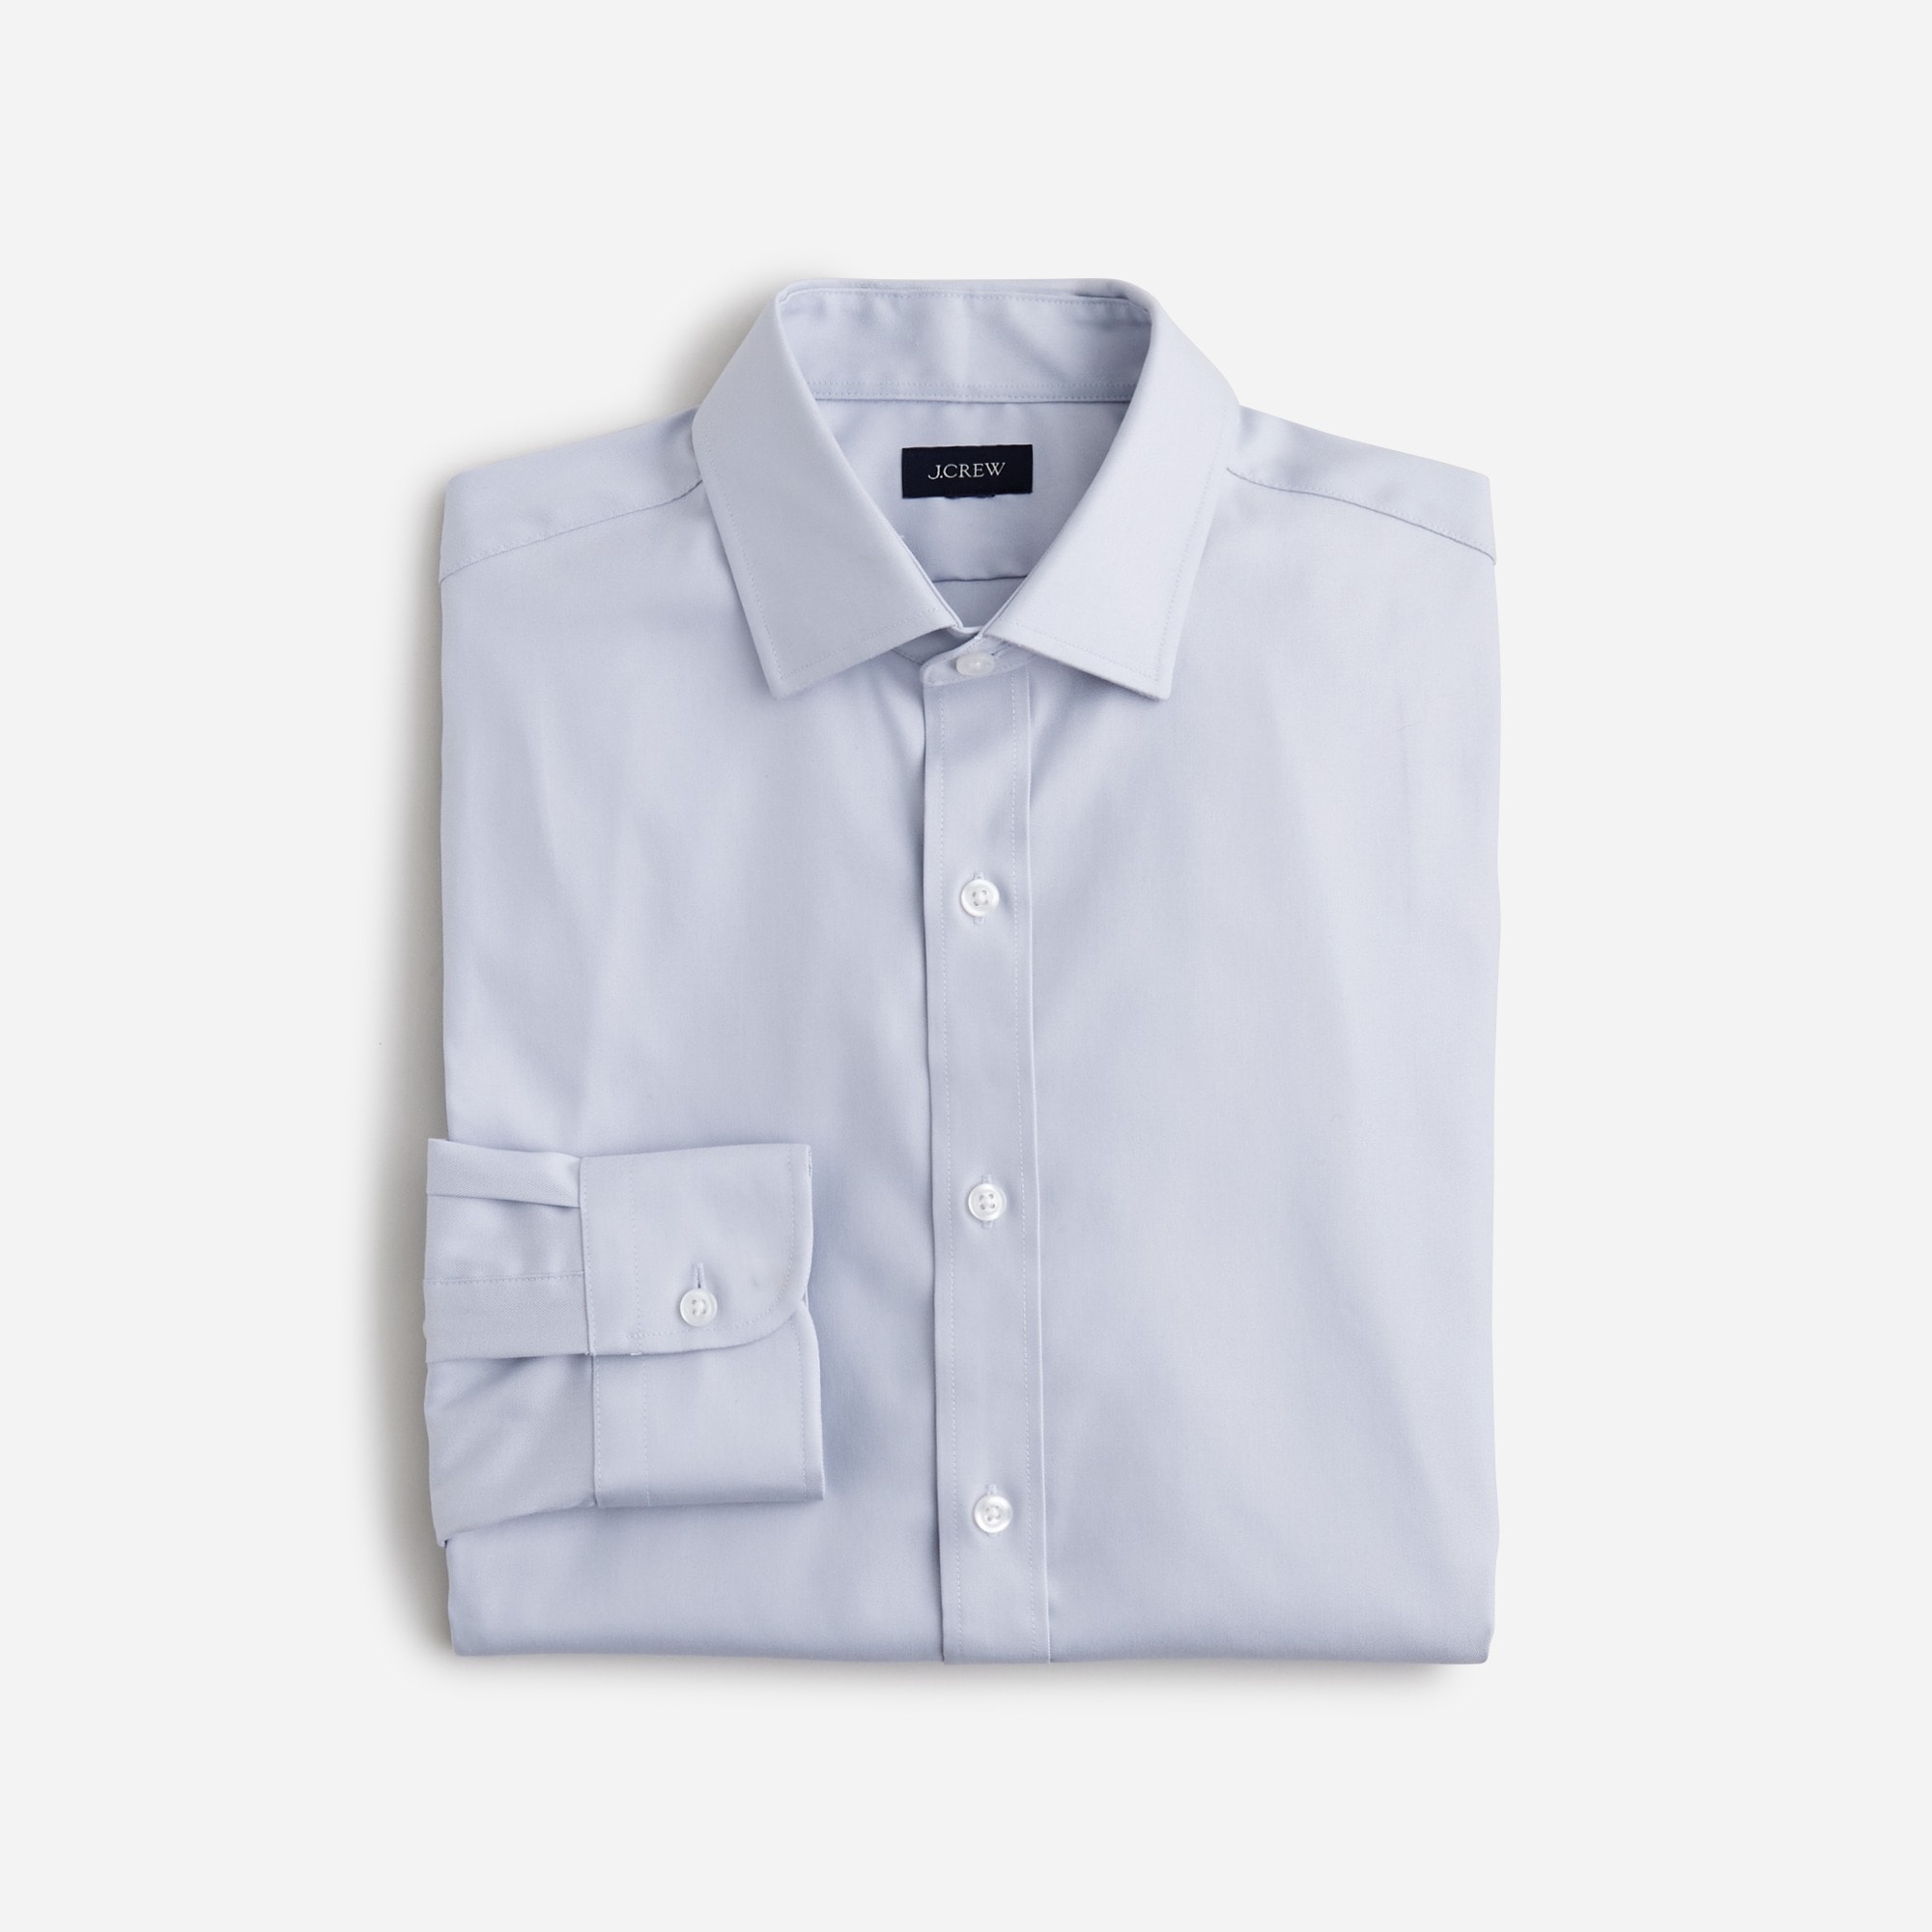 mens Bowery performance stretch dress shirt with spread collar